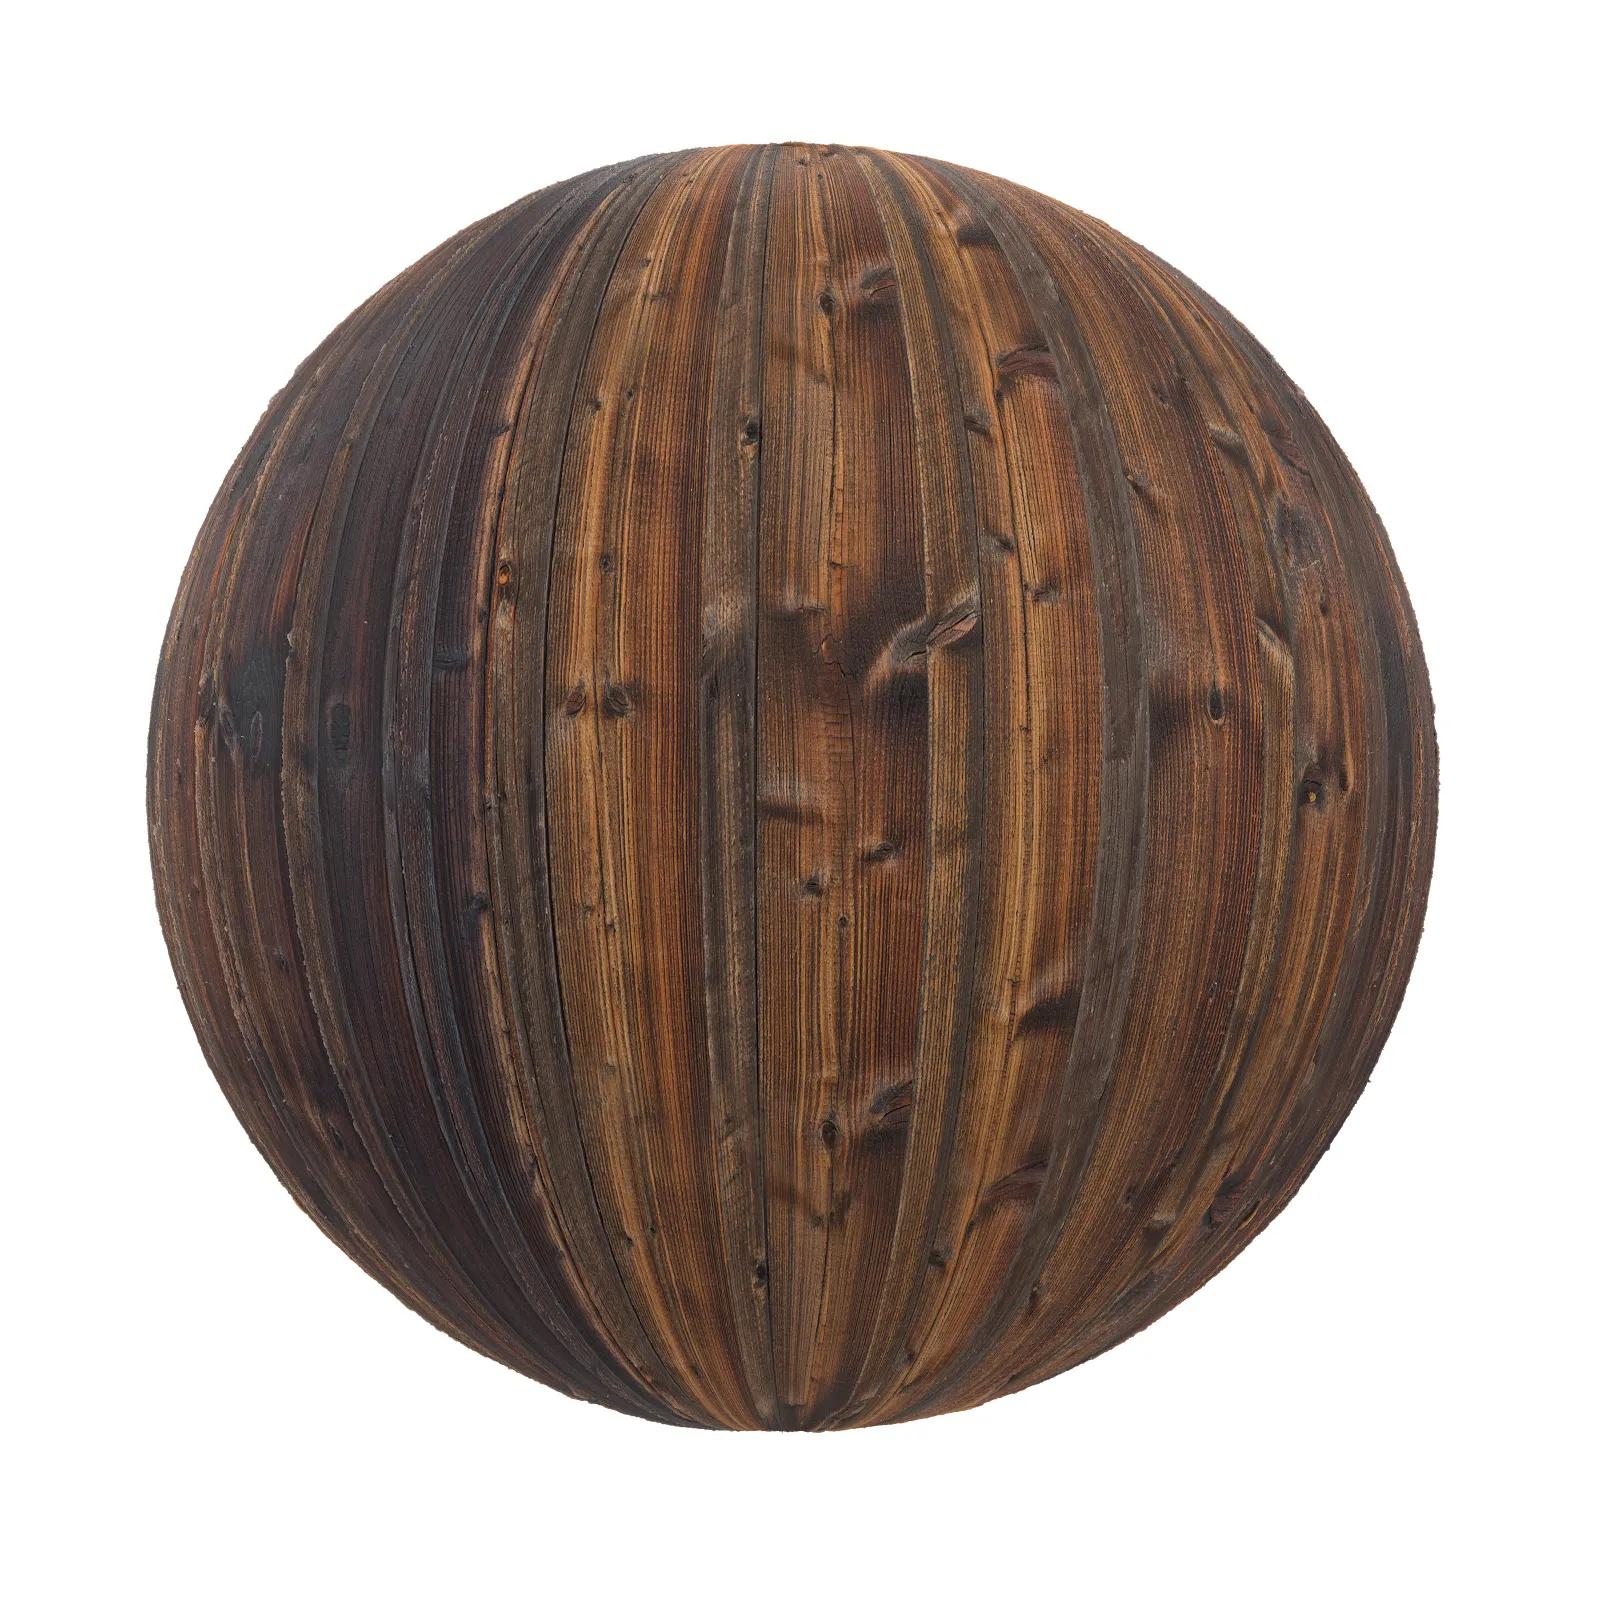 TEXTURES – WOOD – Old Wood 10